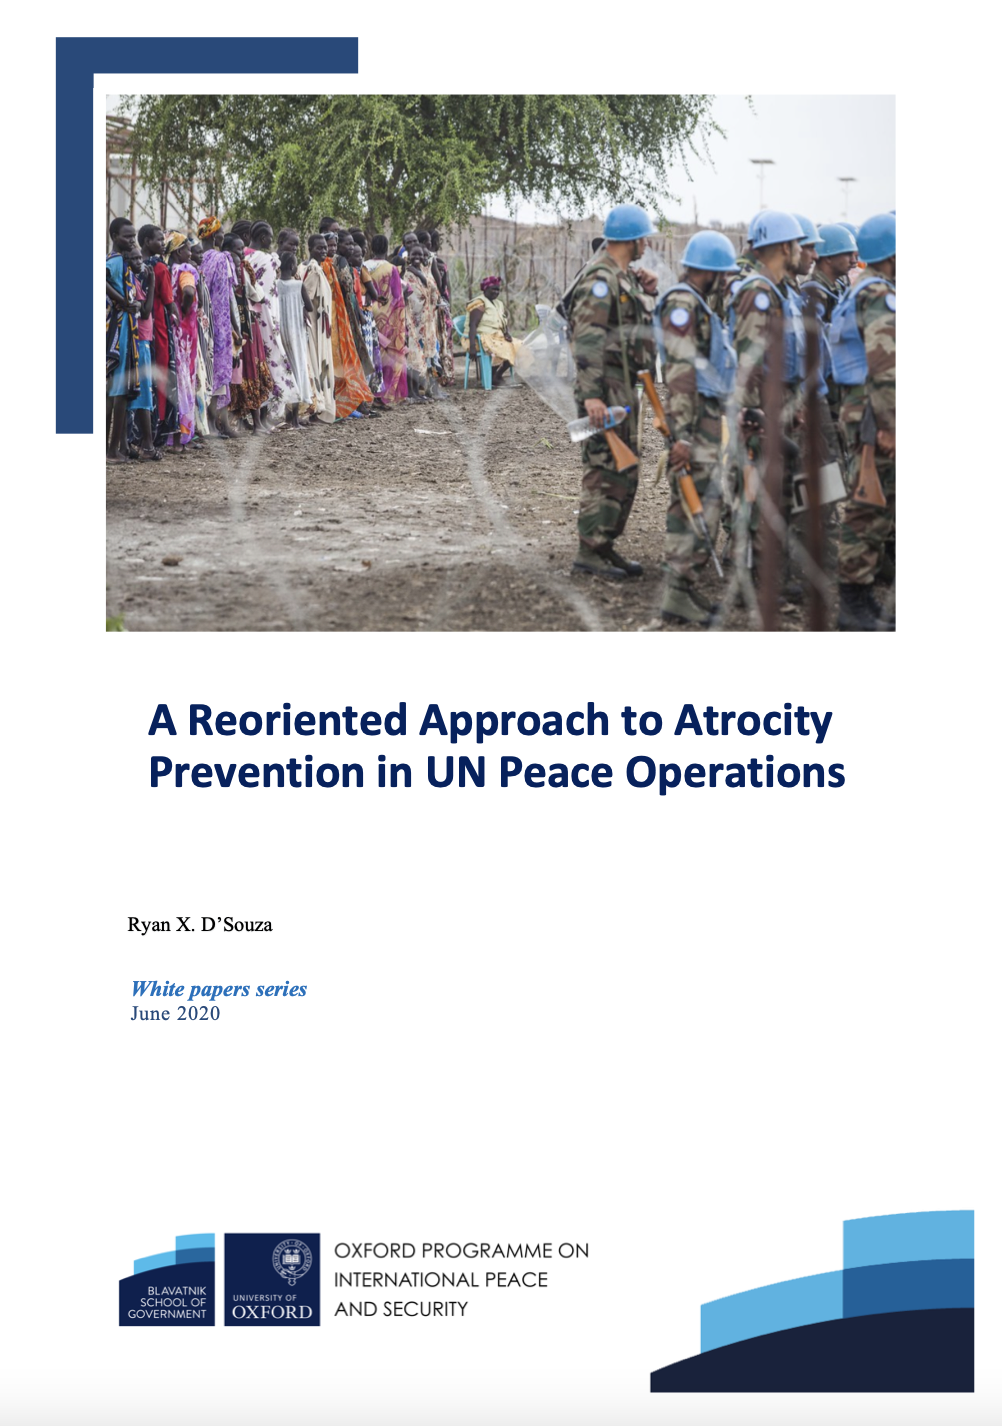 D’Souza, ‘A Reoriented Approach to Atrocity Prevention in UN Peace Operations’